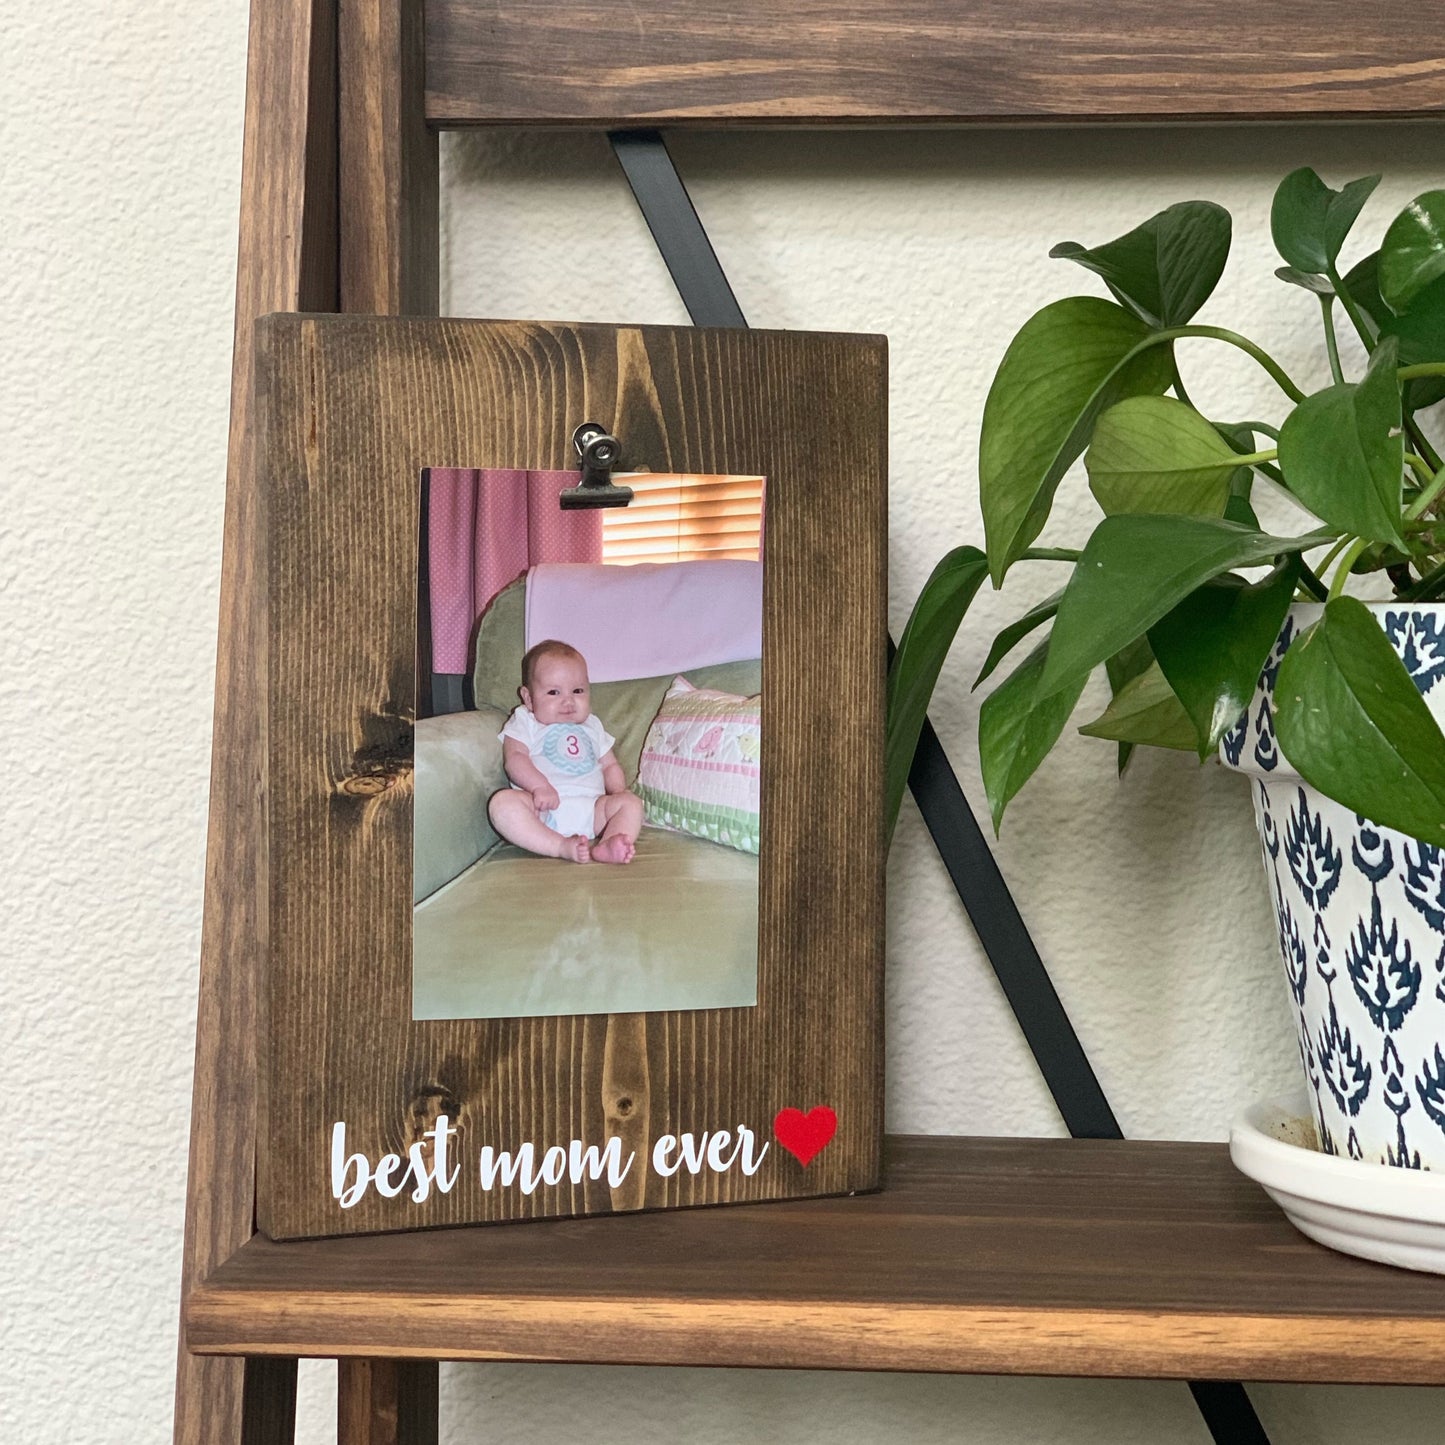 Best Mom Ever Wood Sign With Picture Hanger